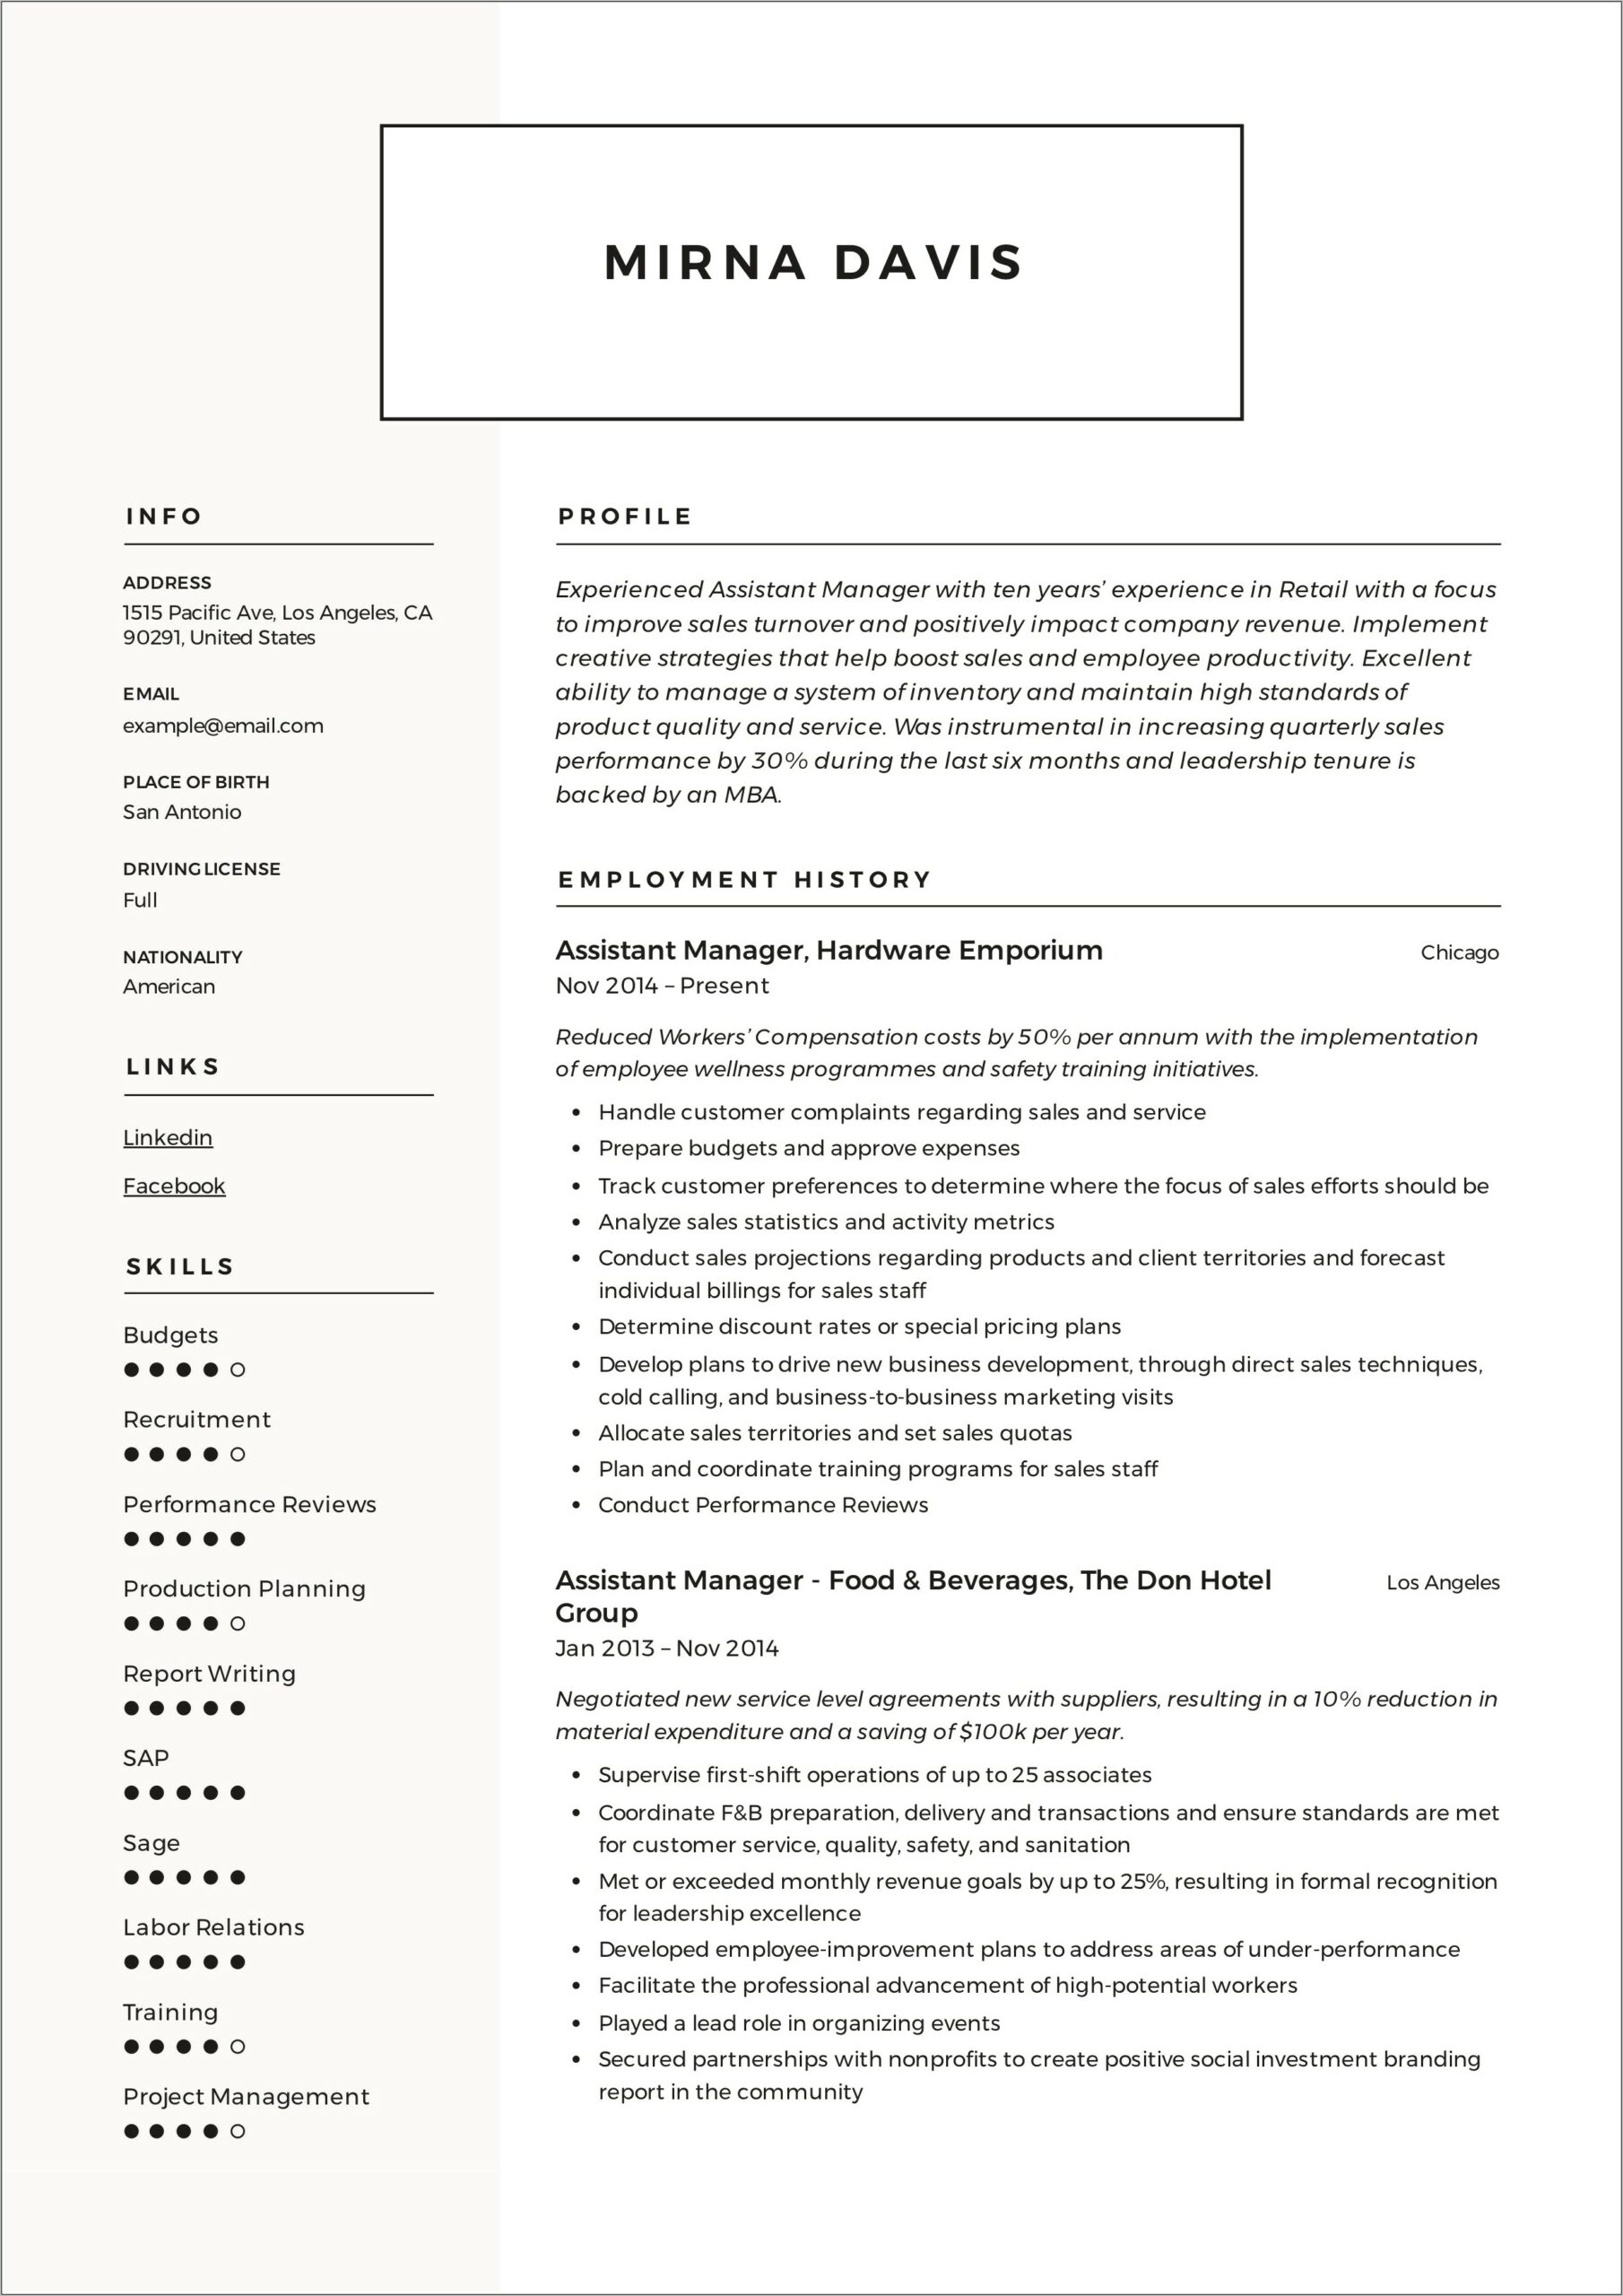 Supermarket Store Manager Resume Example